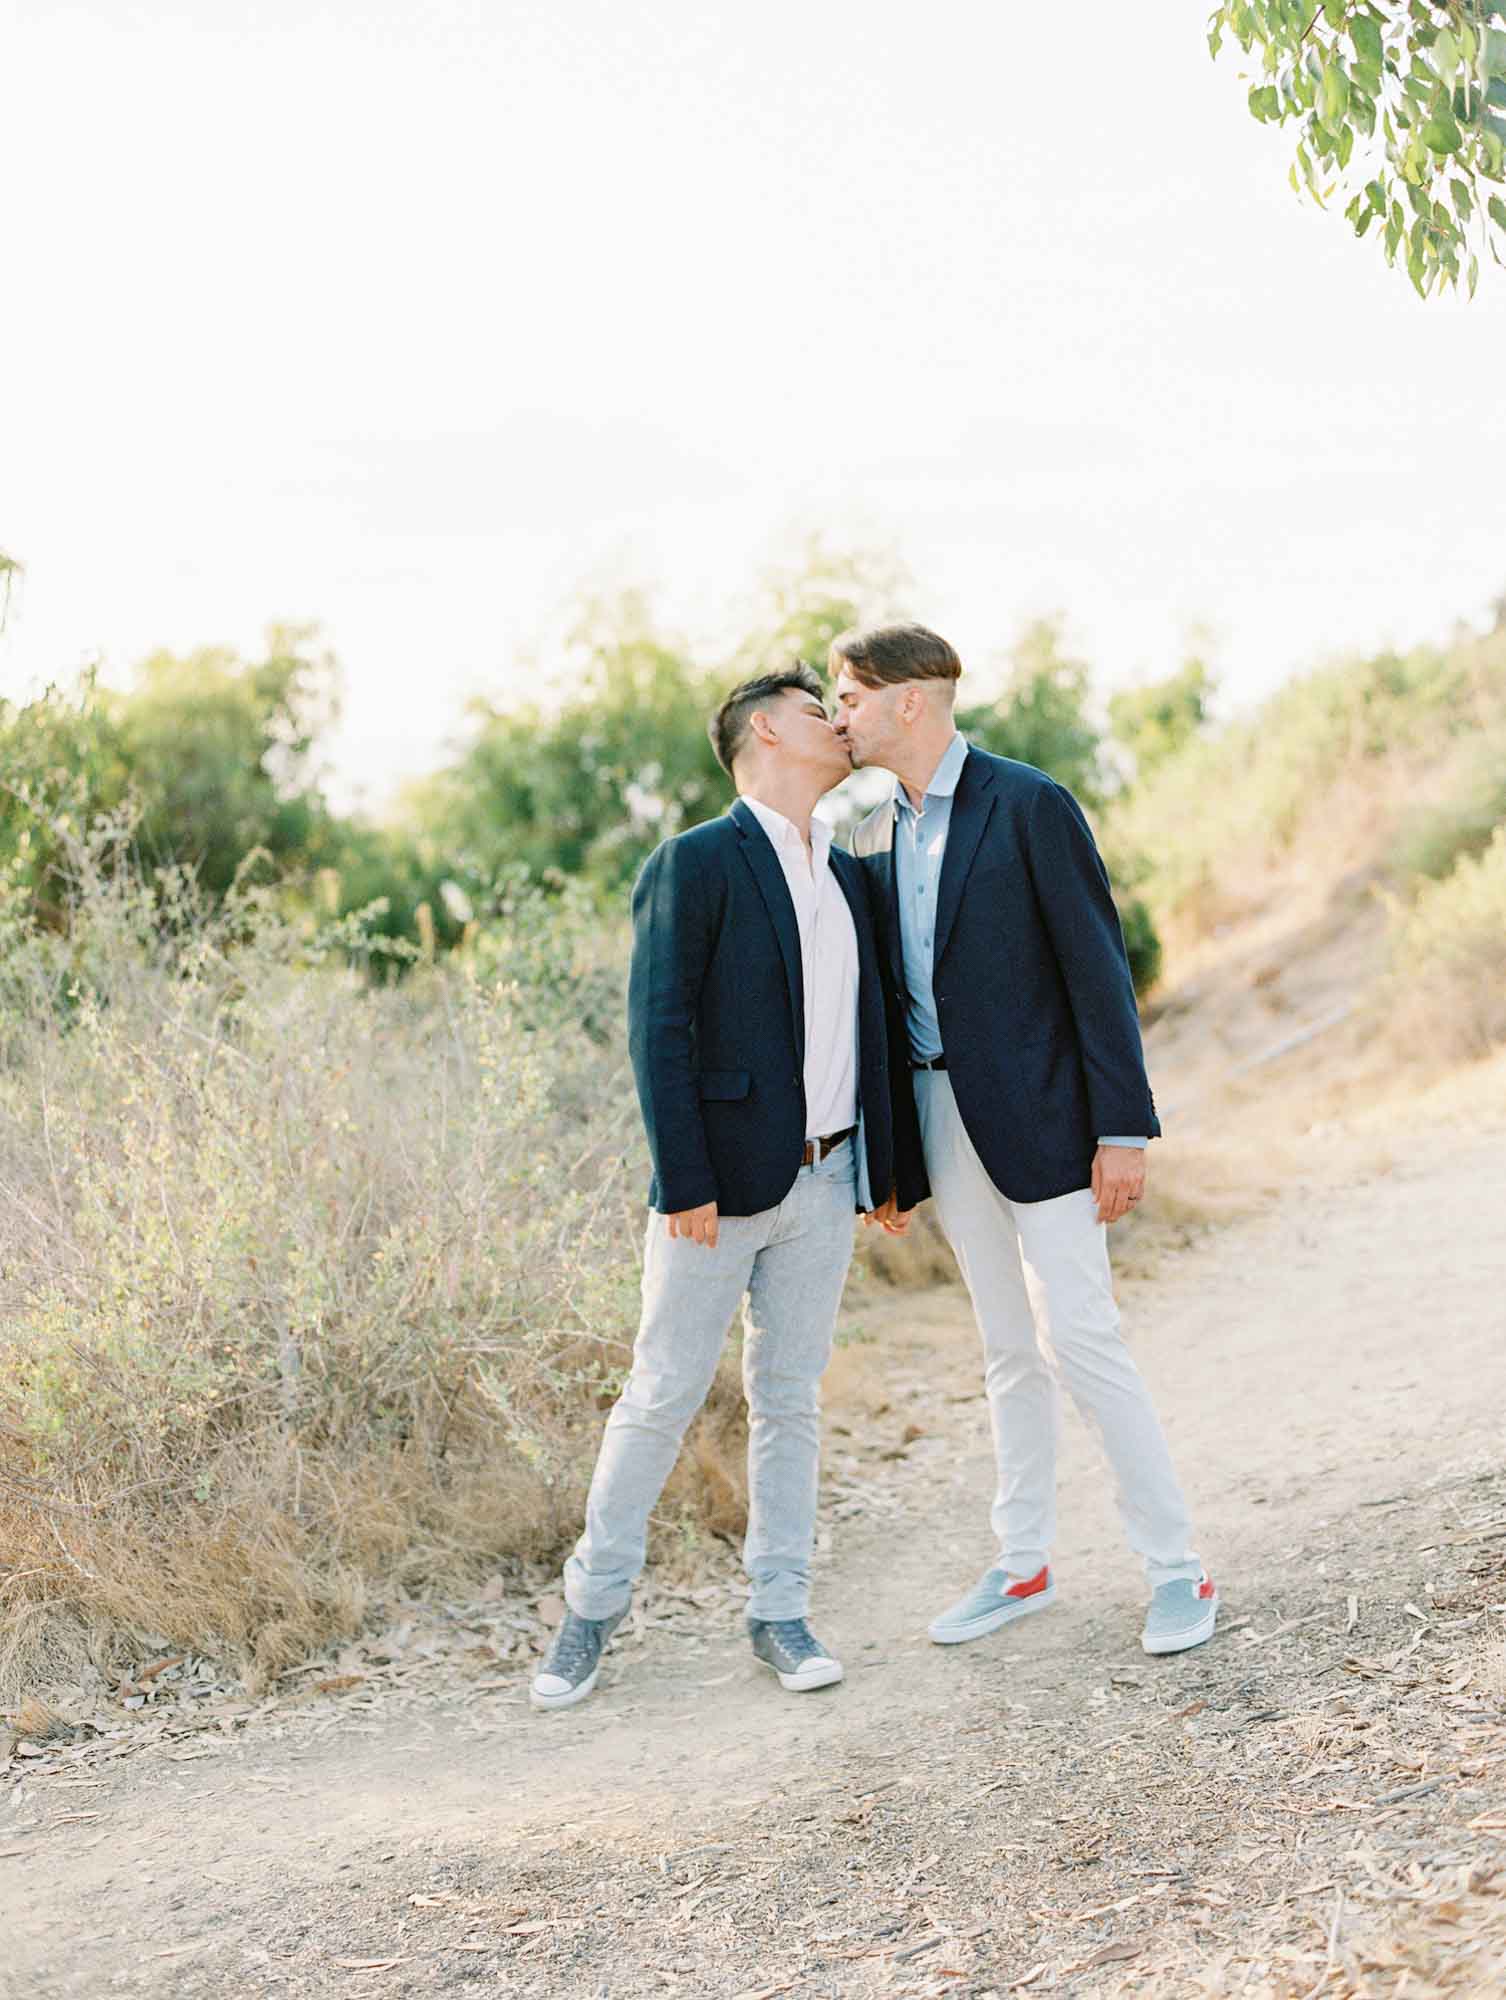 Couple recreates their first date in touching engagement session | Robert Michael Films | Featured on Equally Wed, the leading LGBTQ+ wedding magazine